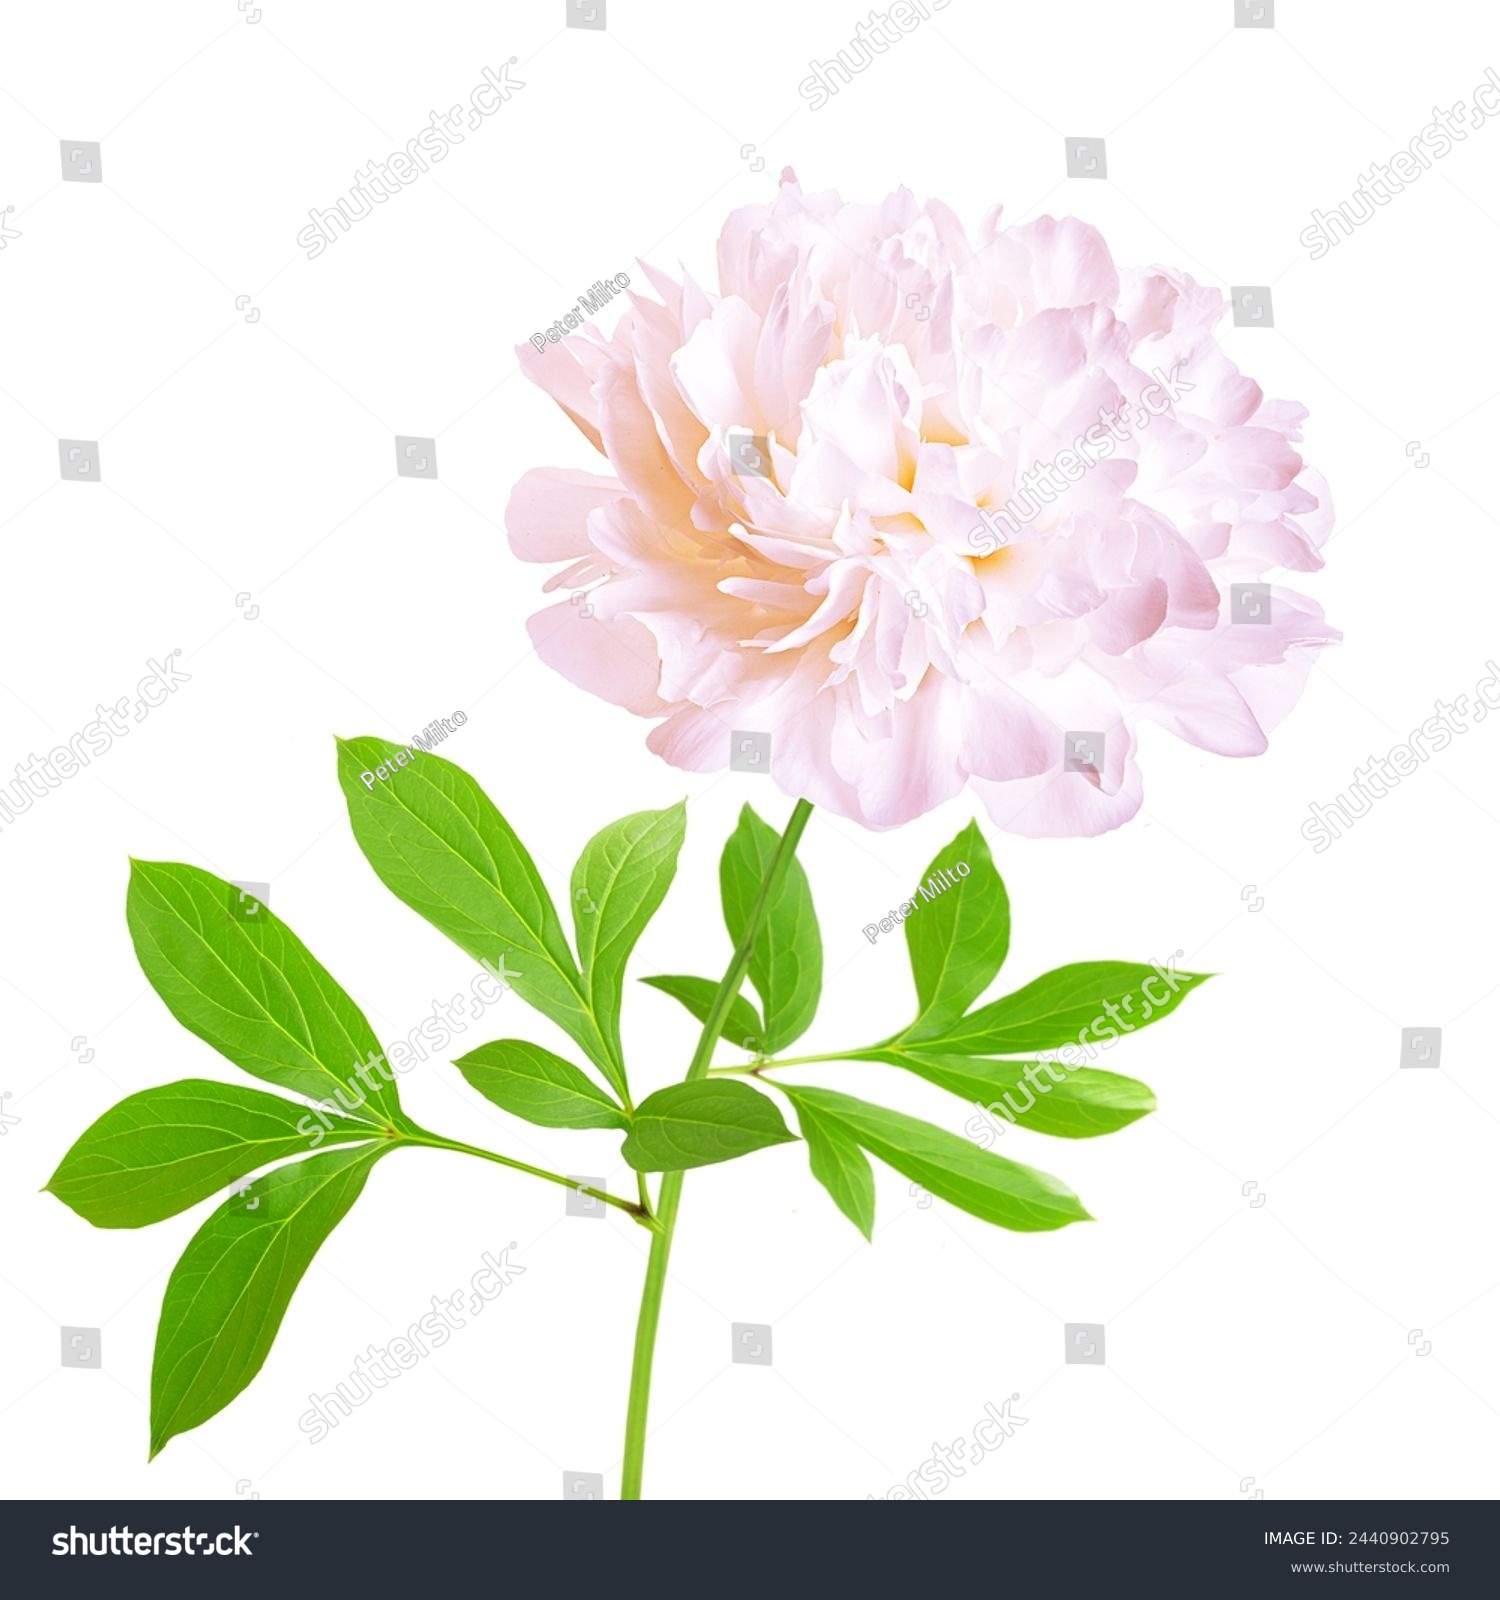 One isolated white peony flower with stem and leaves. White peony flower isolated. Working path saved #2440902795